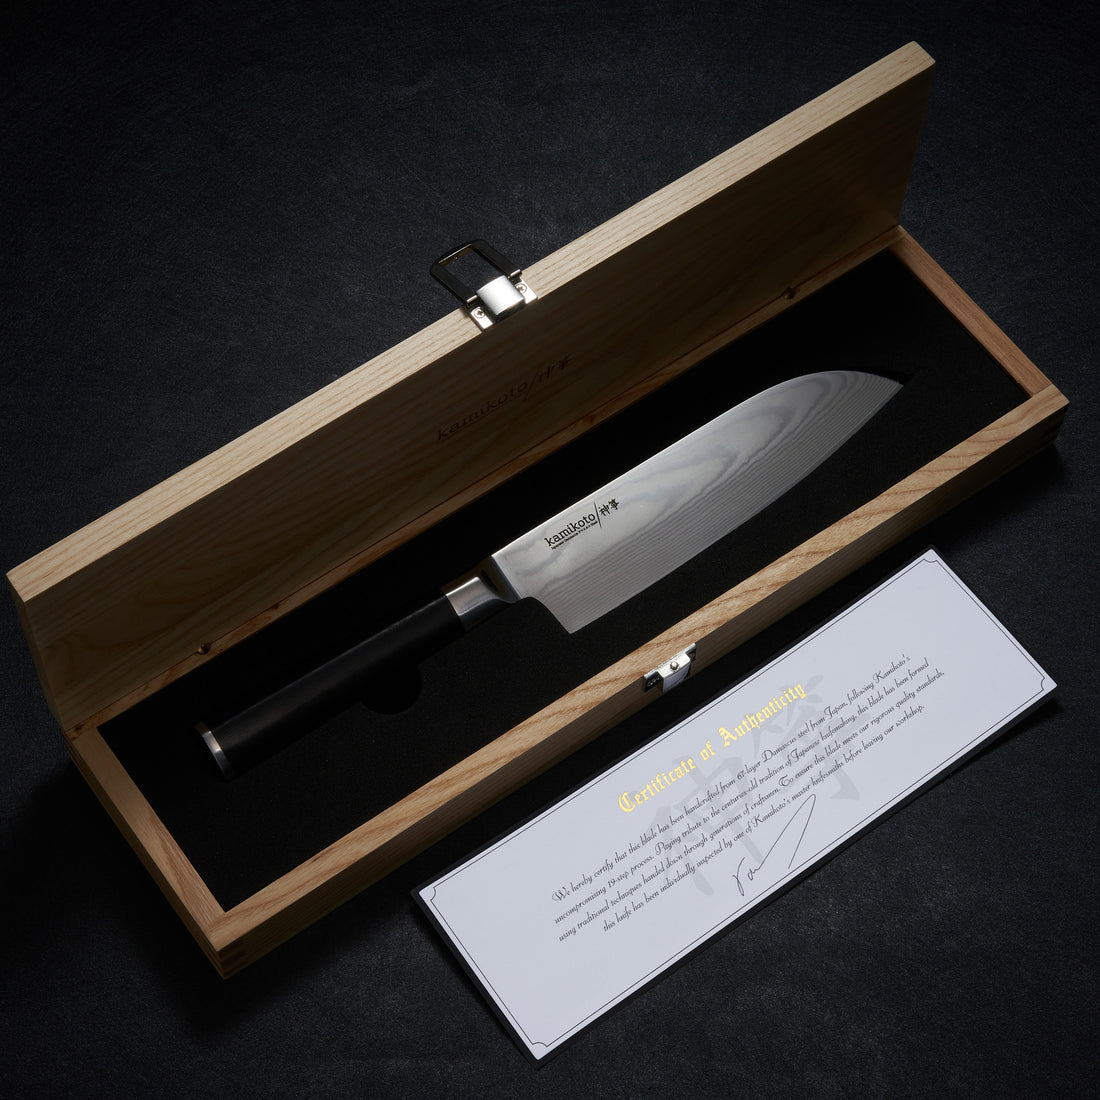 Kamikoto Santoku Chef Knife Unboxing and Review - knife review